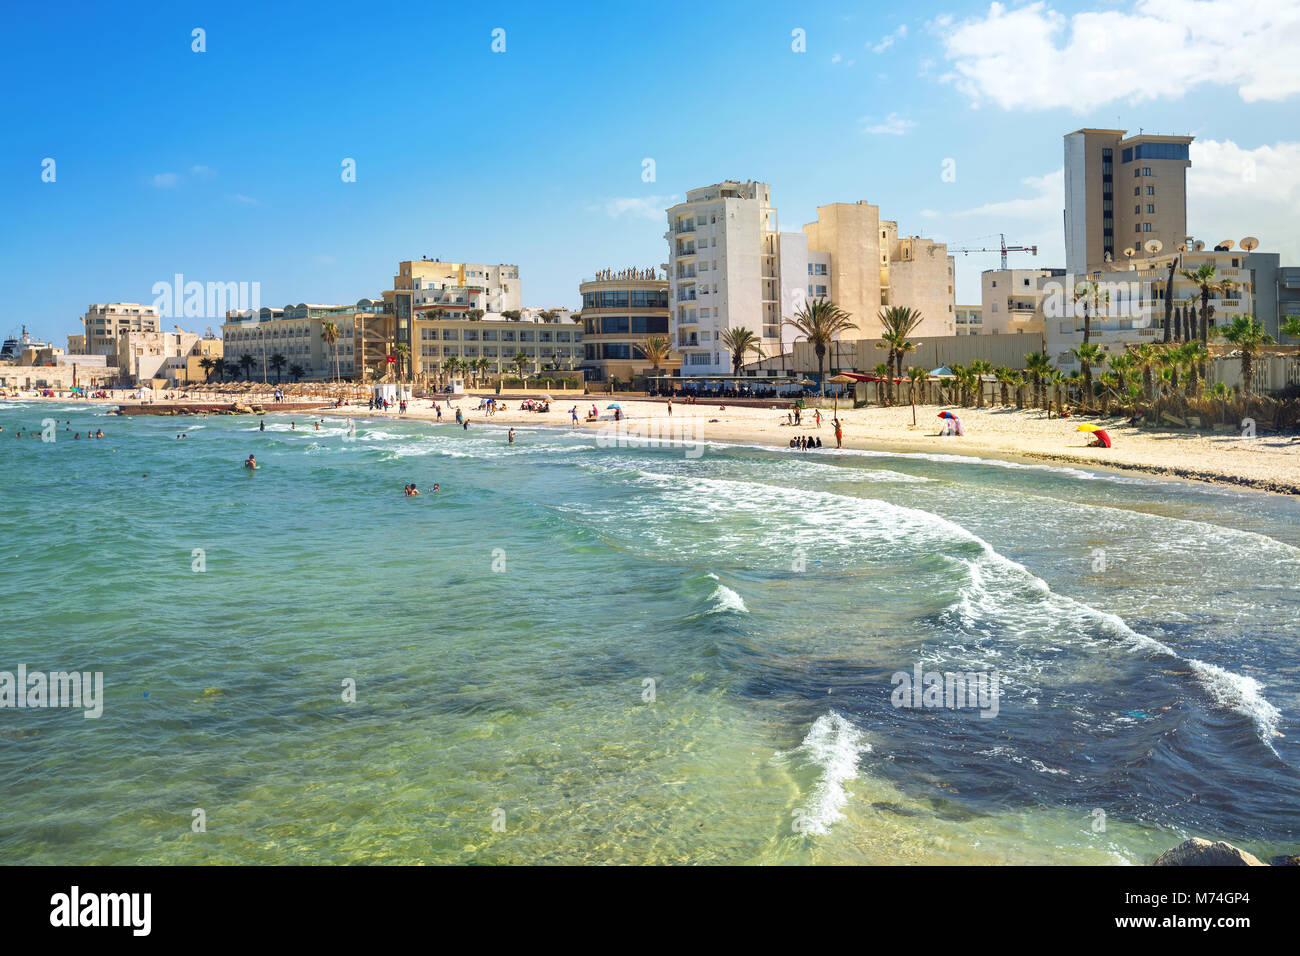 Beach and seafront at Sousse. Tunisia, North Africa Stock Photo